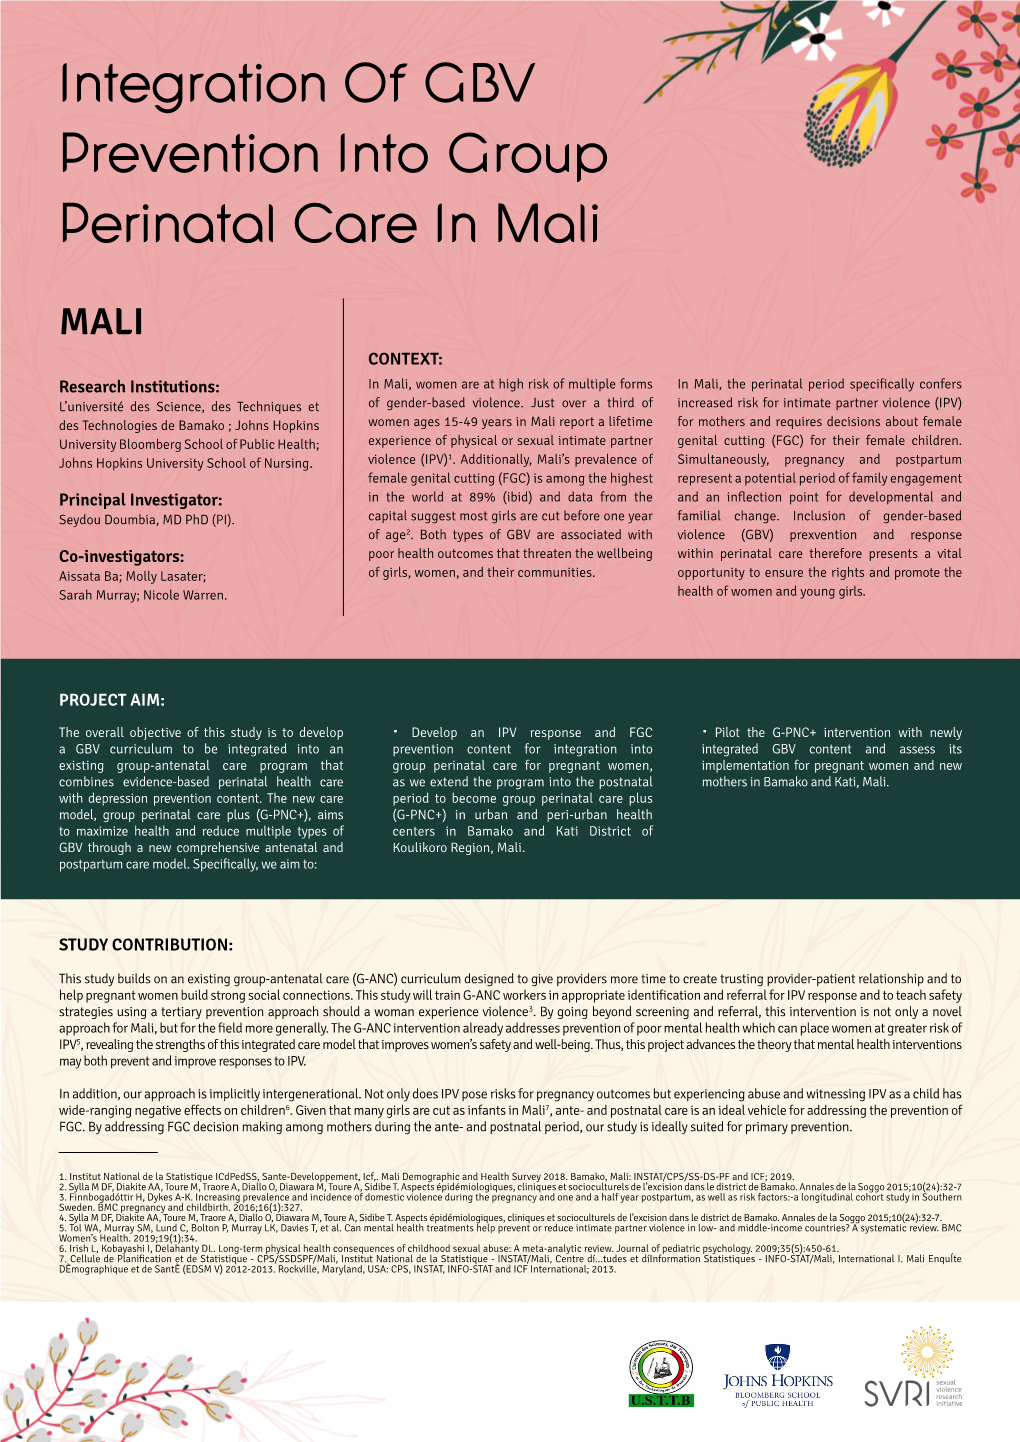 Integration of GBV Prevention Into Group Perinatal Care in Mali